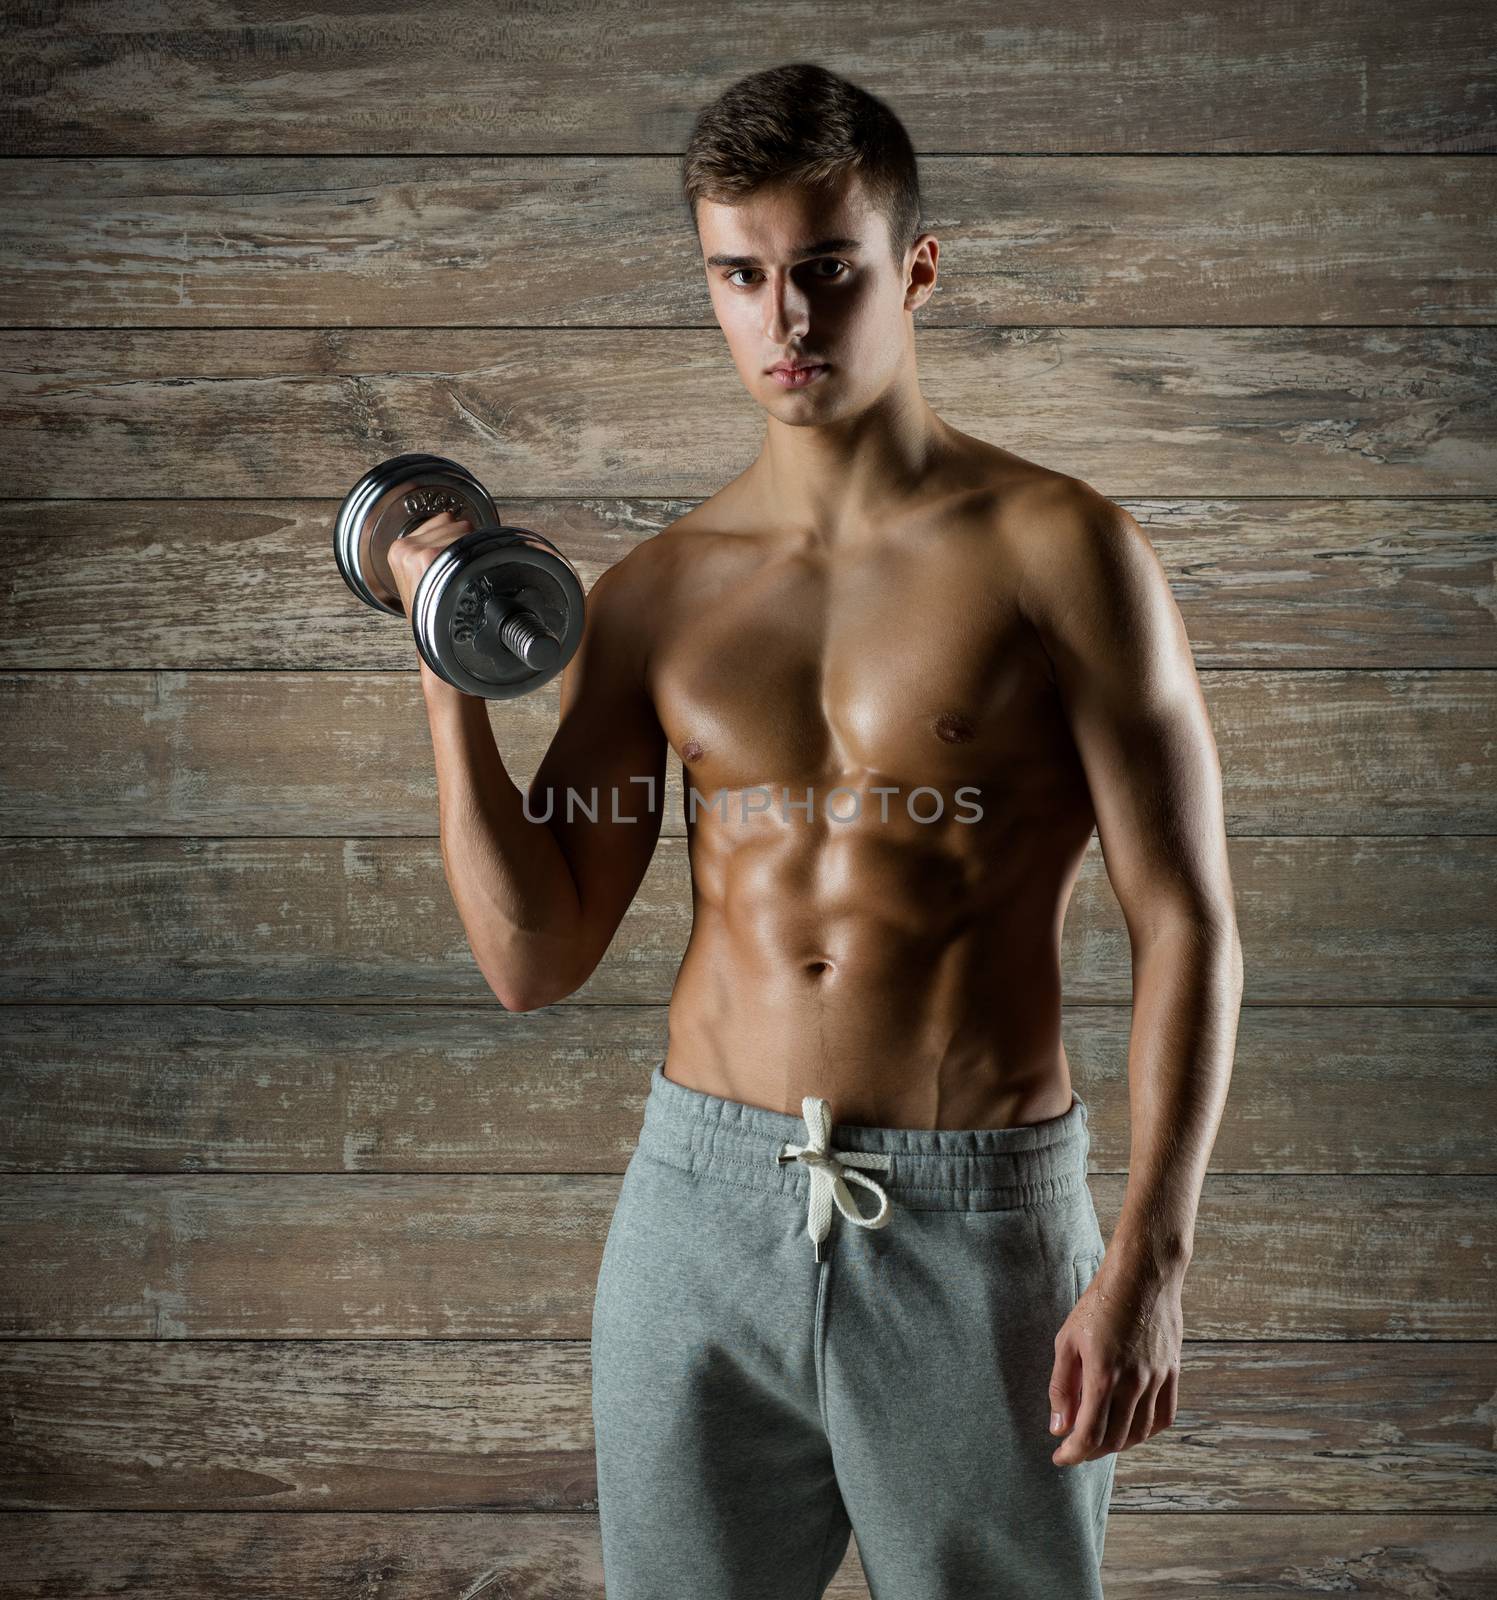 sport, fitness, weightlifting, bodybuilding and people concept - young man with dumbbell flexing biceps over wooden wall background